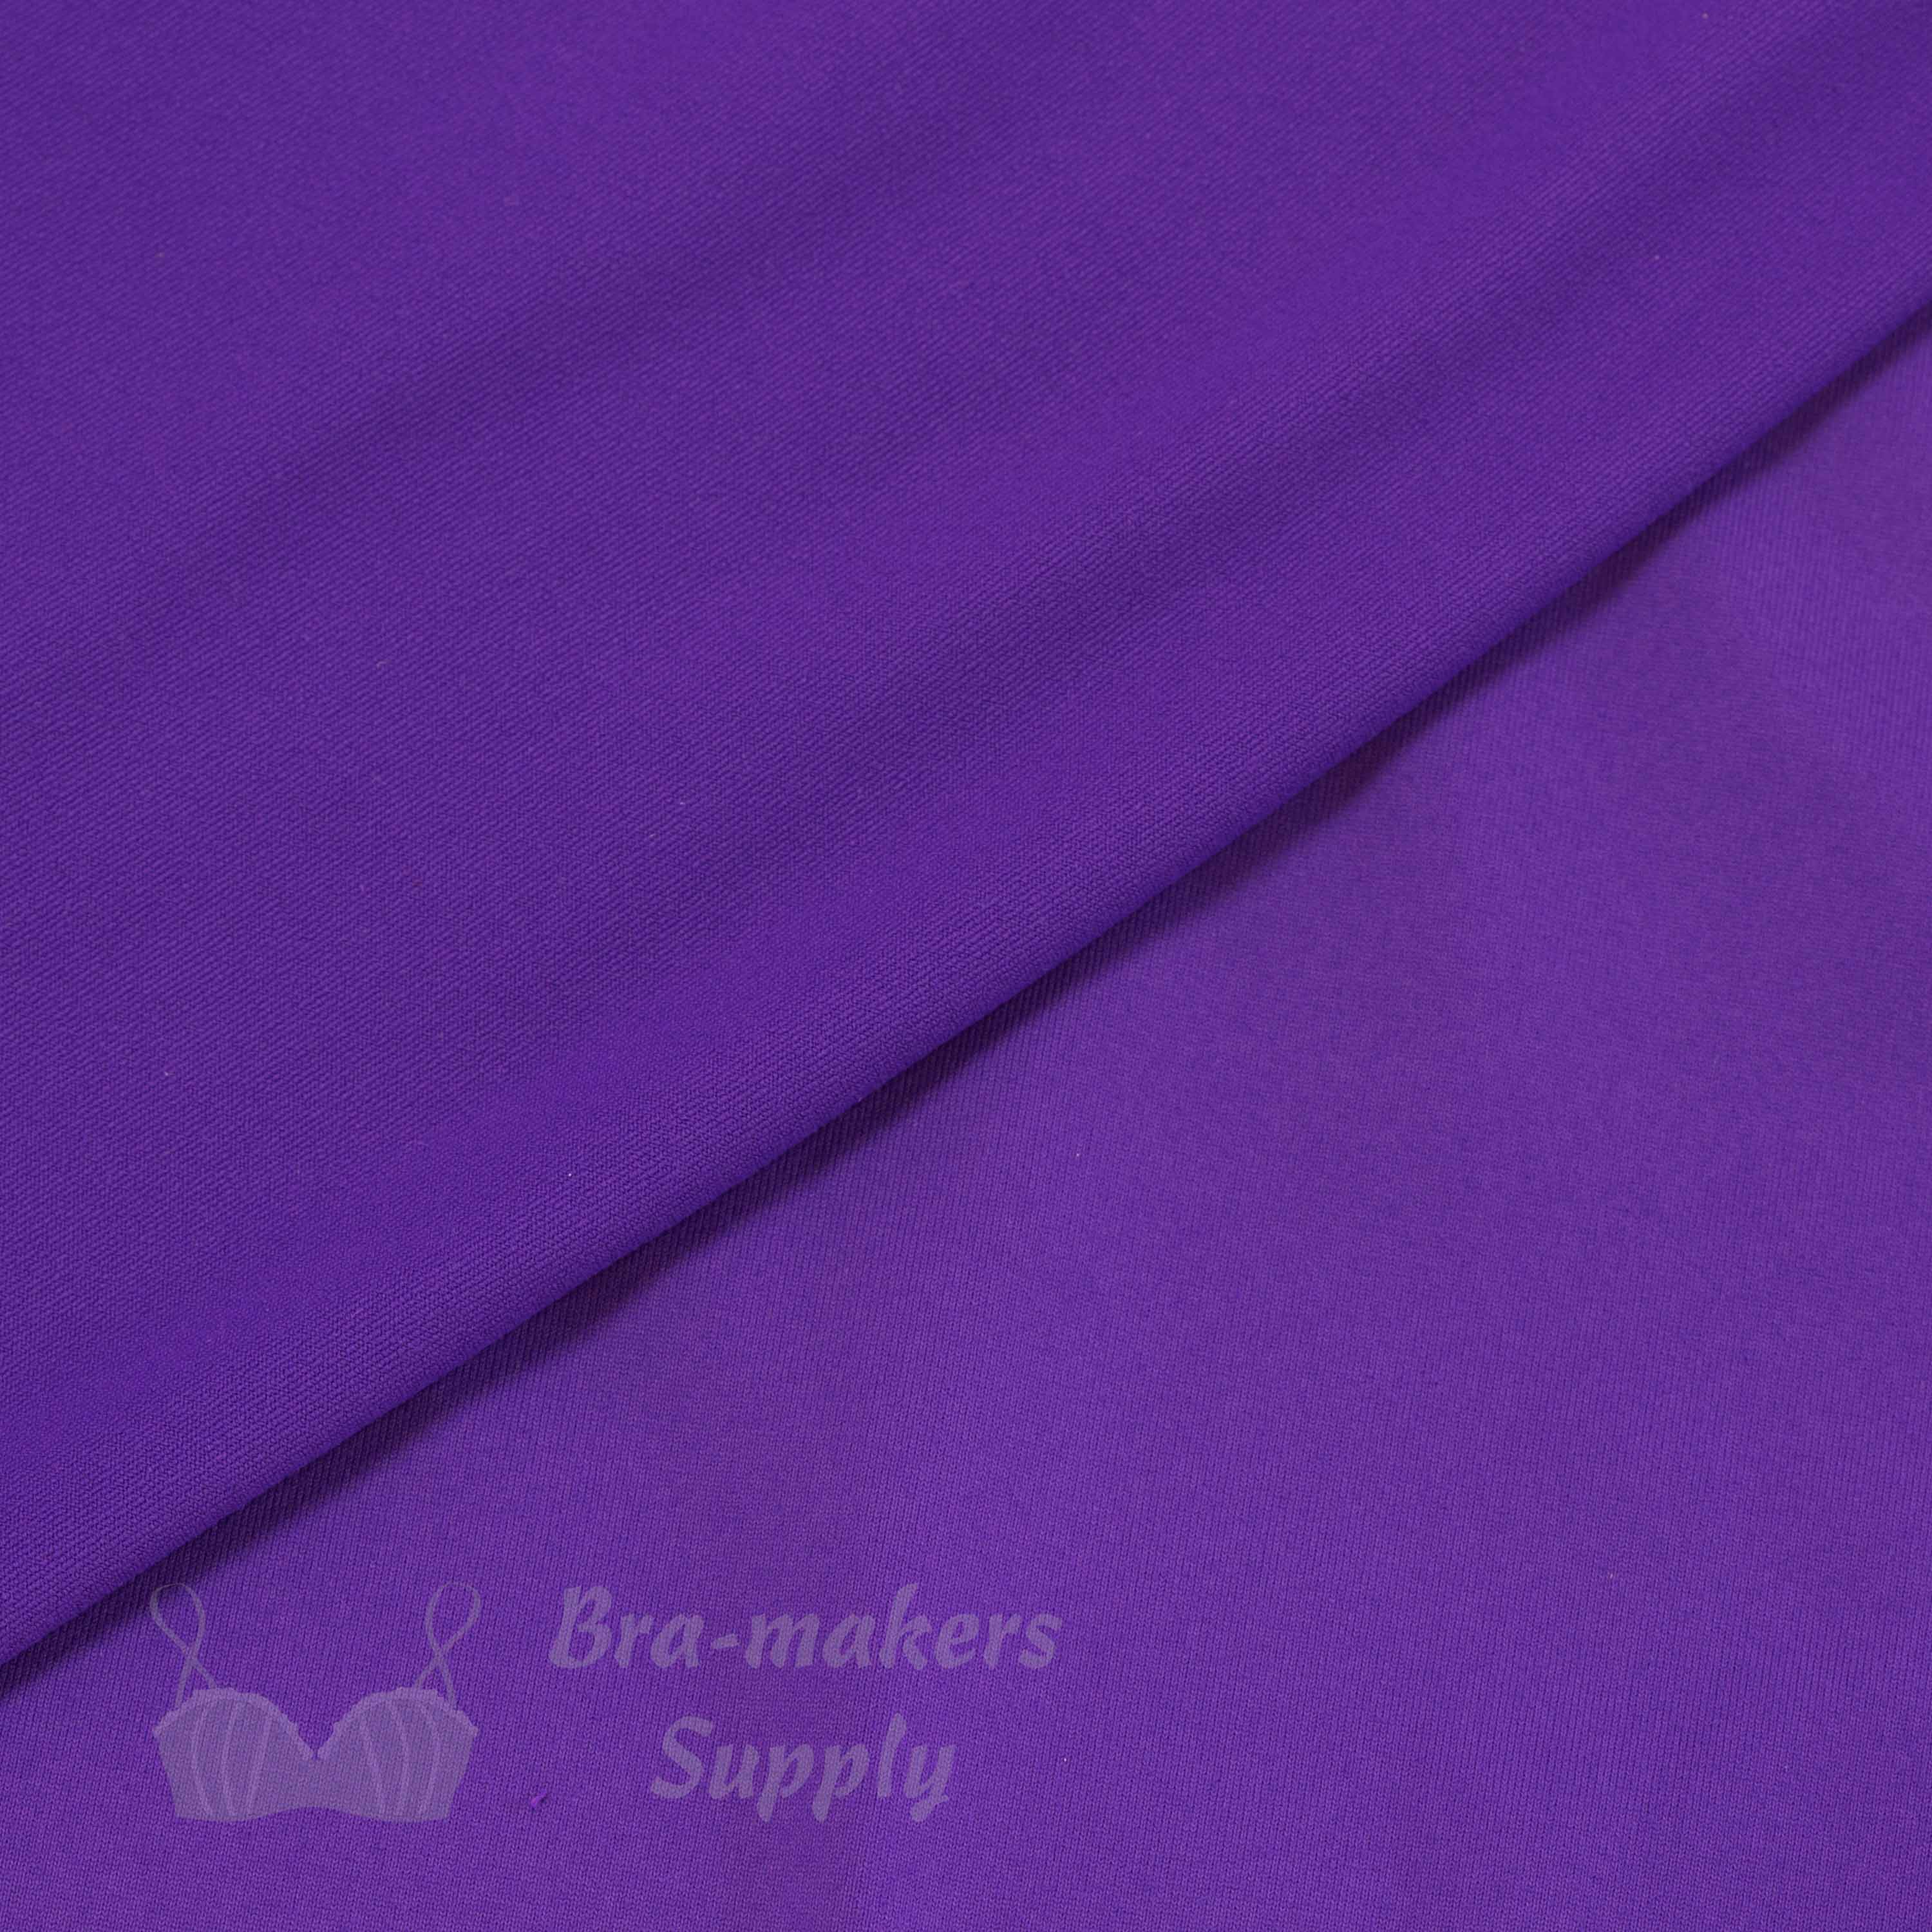 Supplex Active Wear Stretch Fabric - make your own yoga pants!